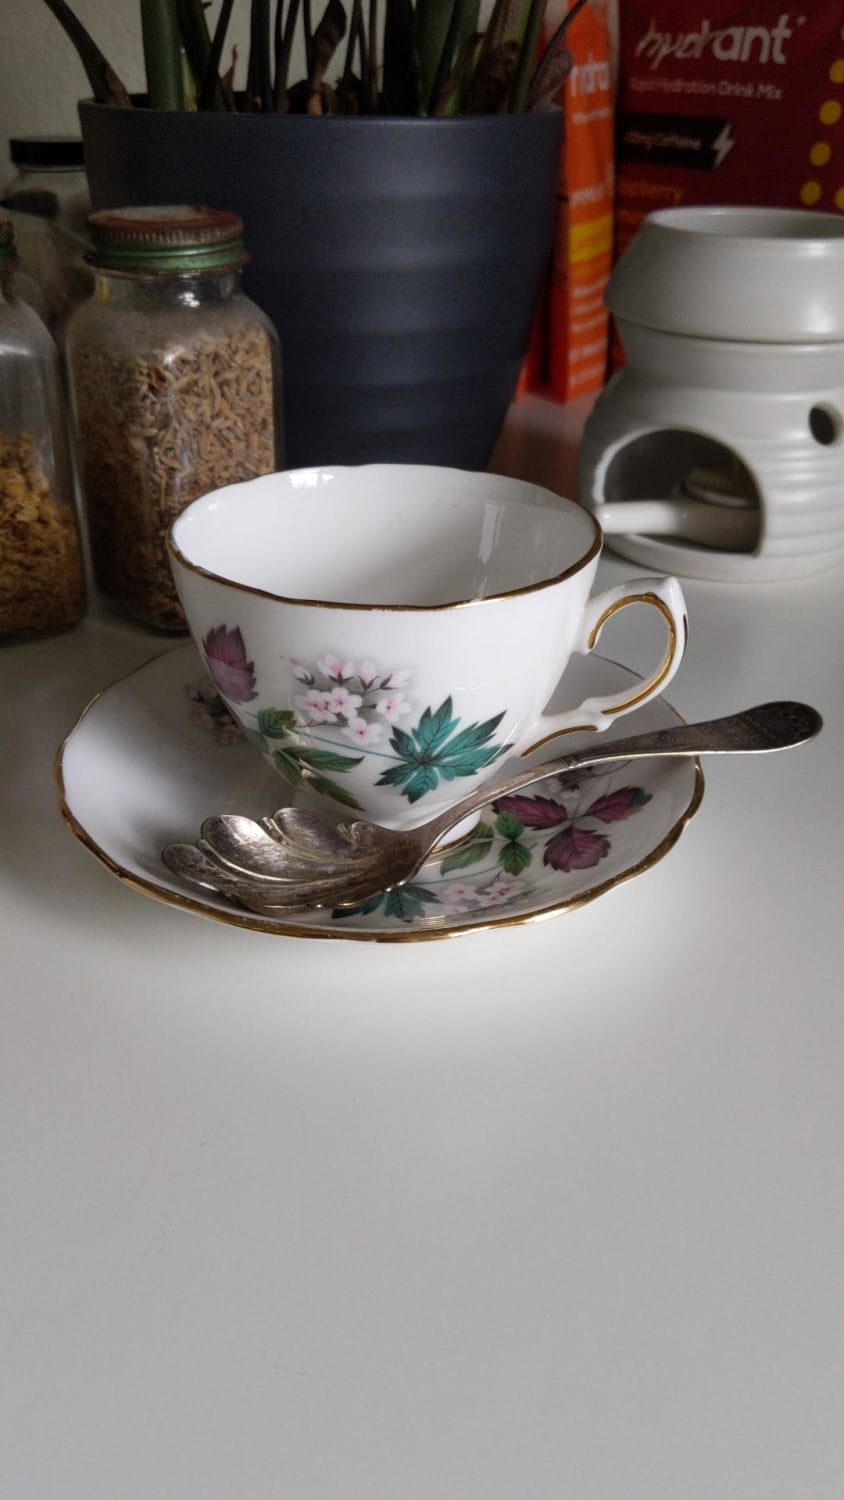 Not overtly witchy, but I picked up this tea cup, saucer, and spoon yesterday because they remind me of a set my Grandma used to have. Here's to many cups of tea and good vibes.